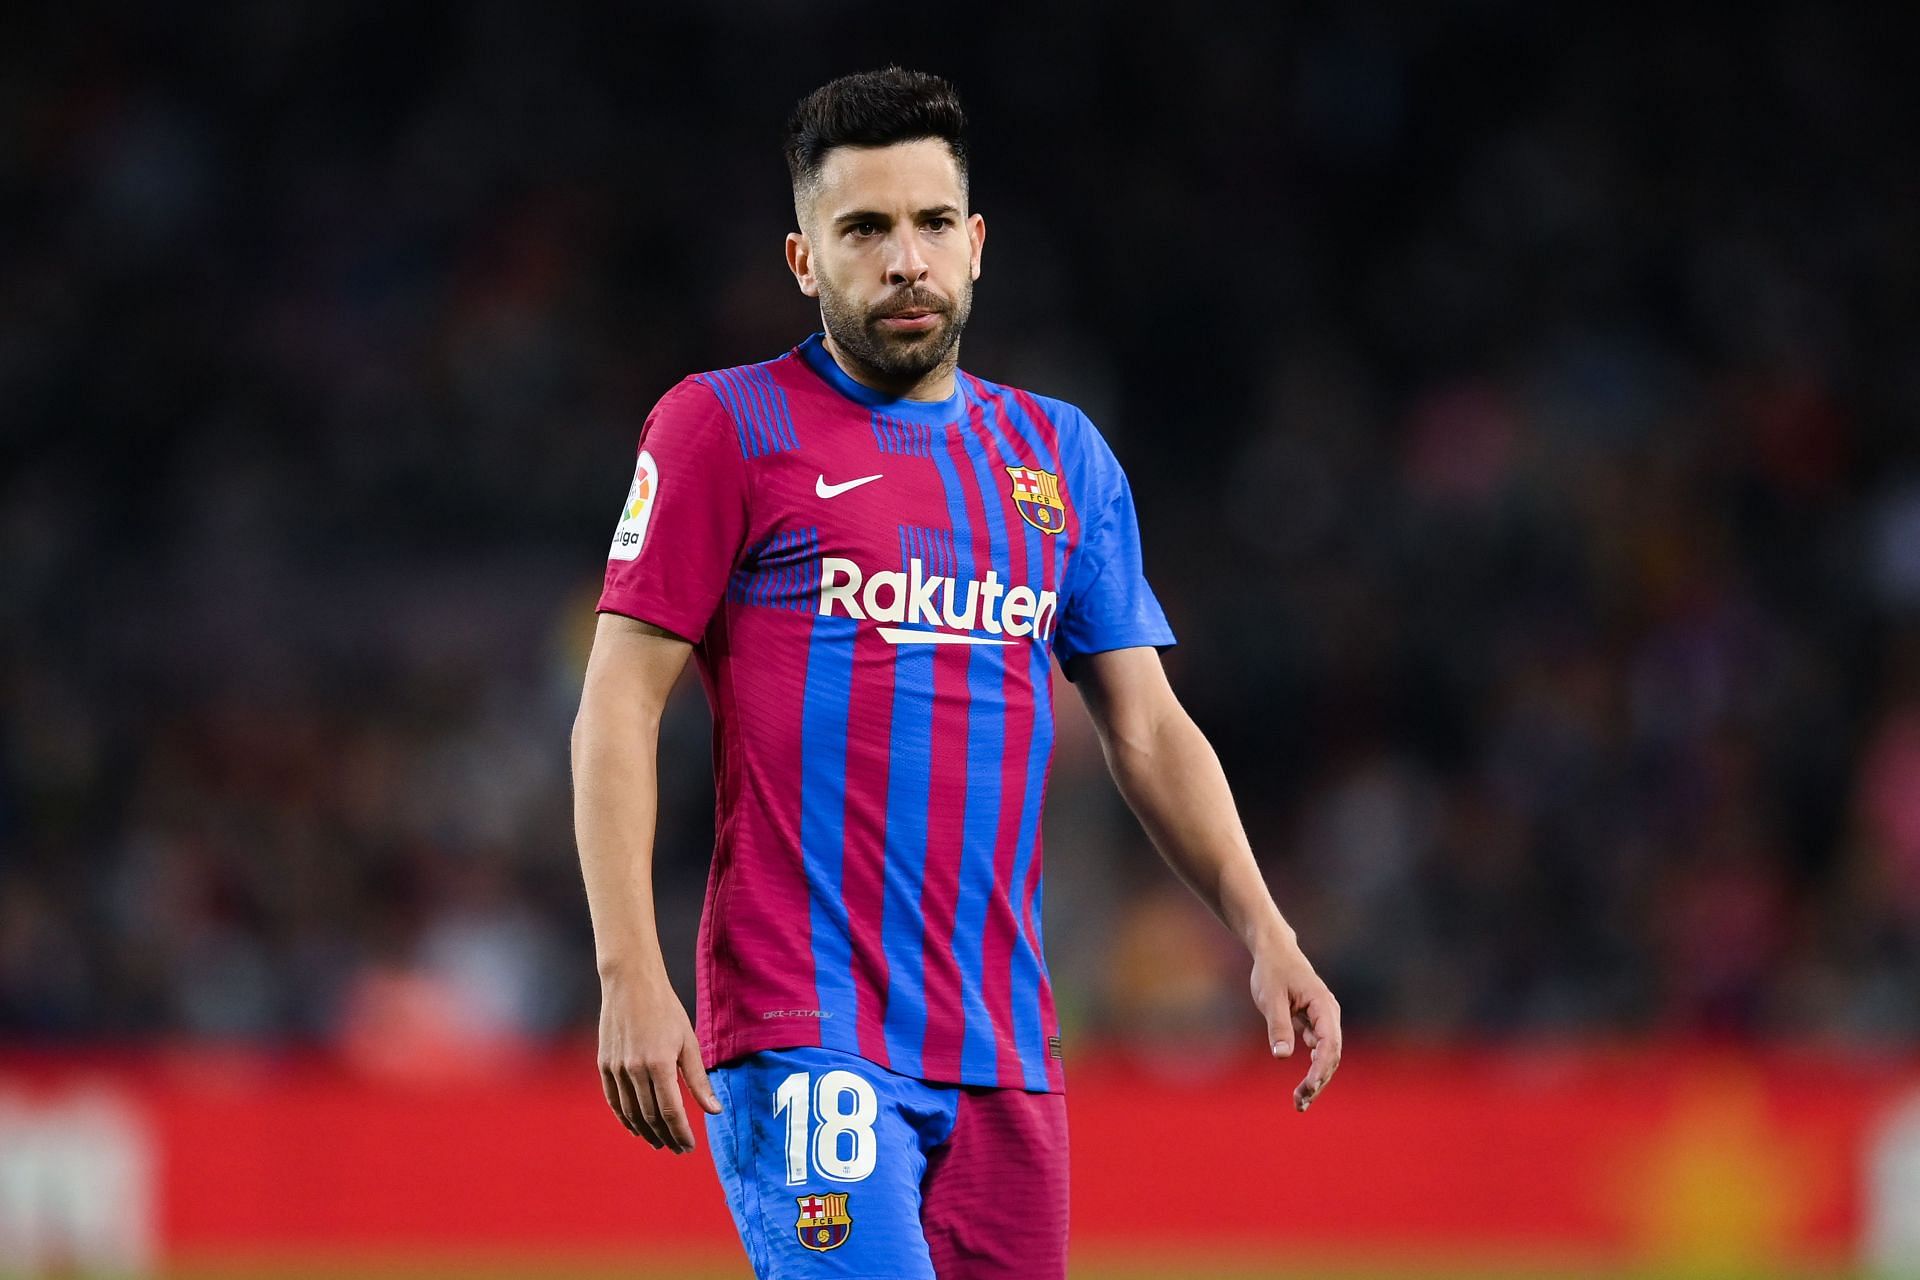 Jordi Alba could make his first FIFPro World XI appearance this year.